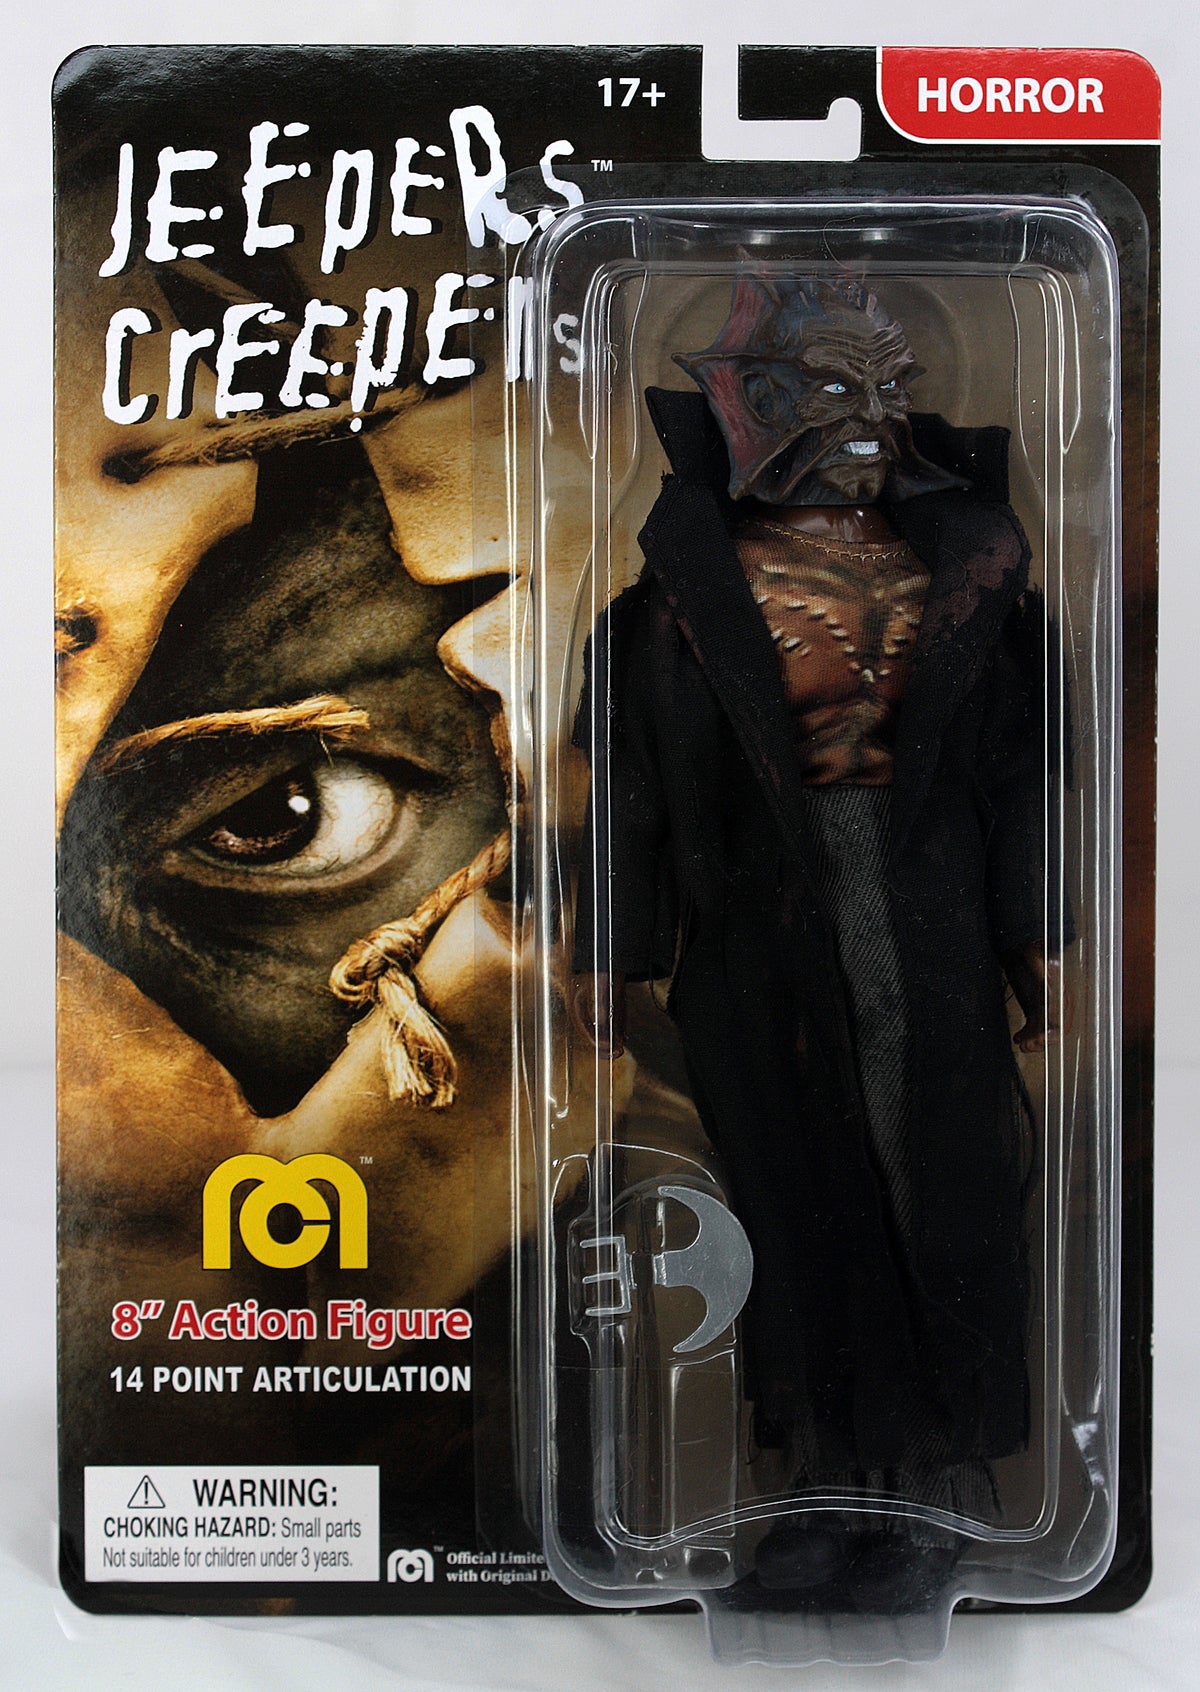 Mego Horror Wave 14 - Jeepers Creepers (Outfit Variant) 8" Action Figure (Pre-Order Ships Dec/Jan) - Zlc Collectibles